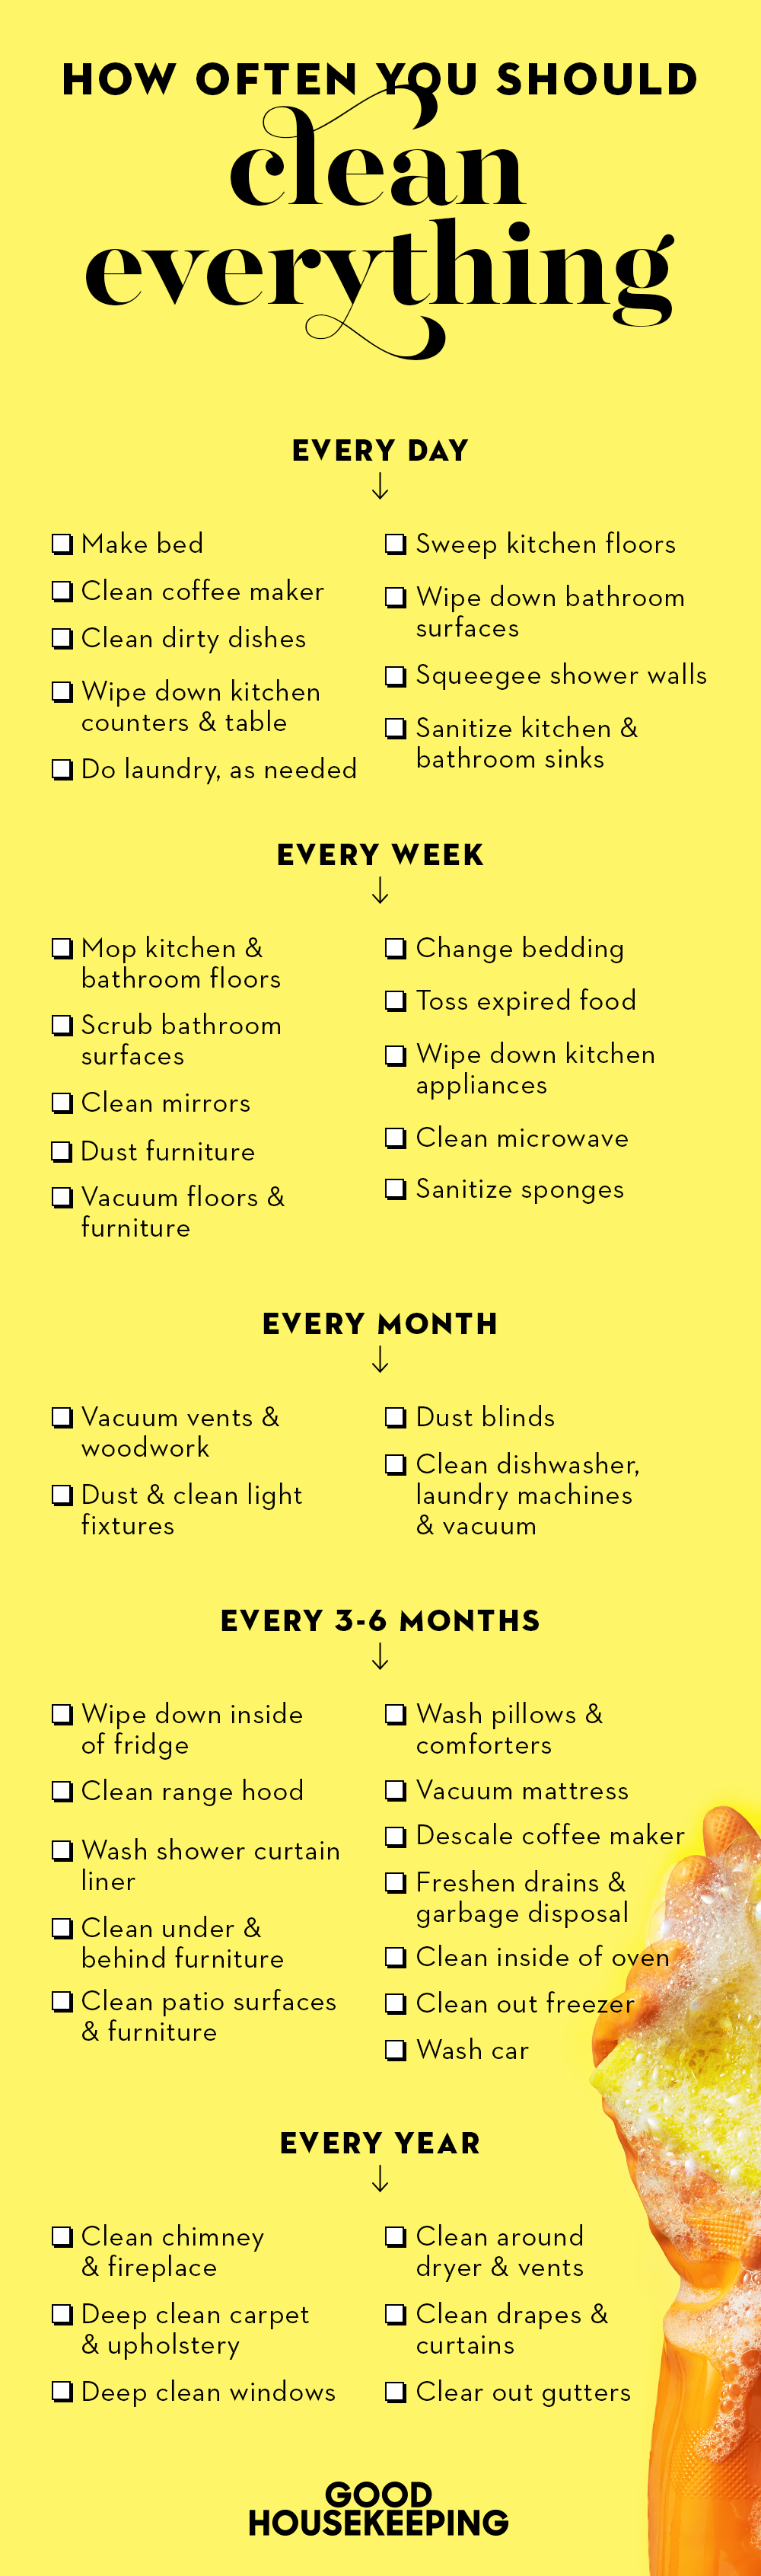 Cleaning Routine Housework Schedule Weekly Checklist Daily Household Chores 